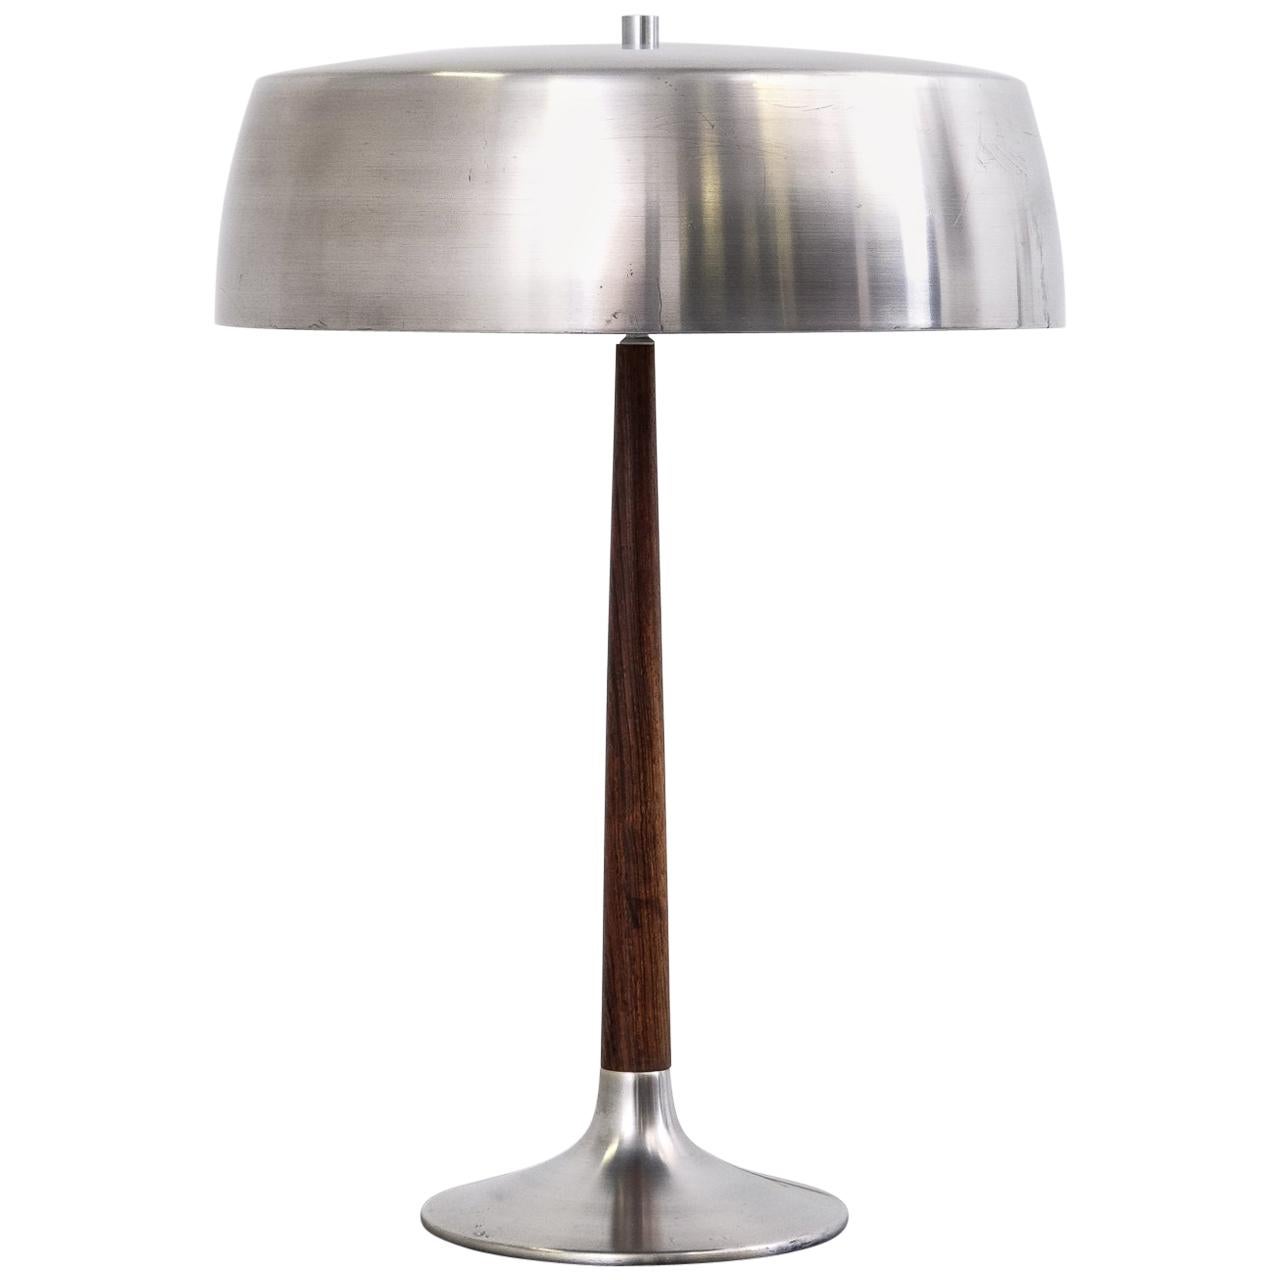 1960s Table Lamp in Rosewood and Aluminium by Svend Aage Holm Sørensen